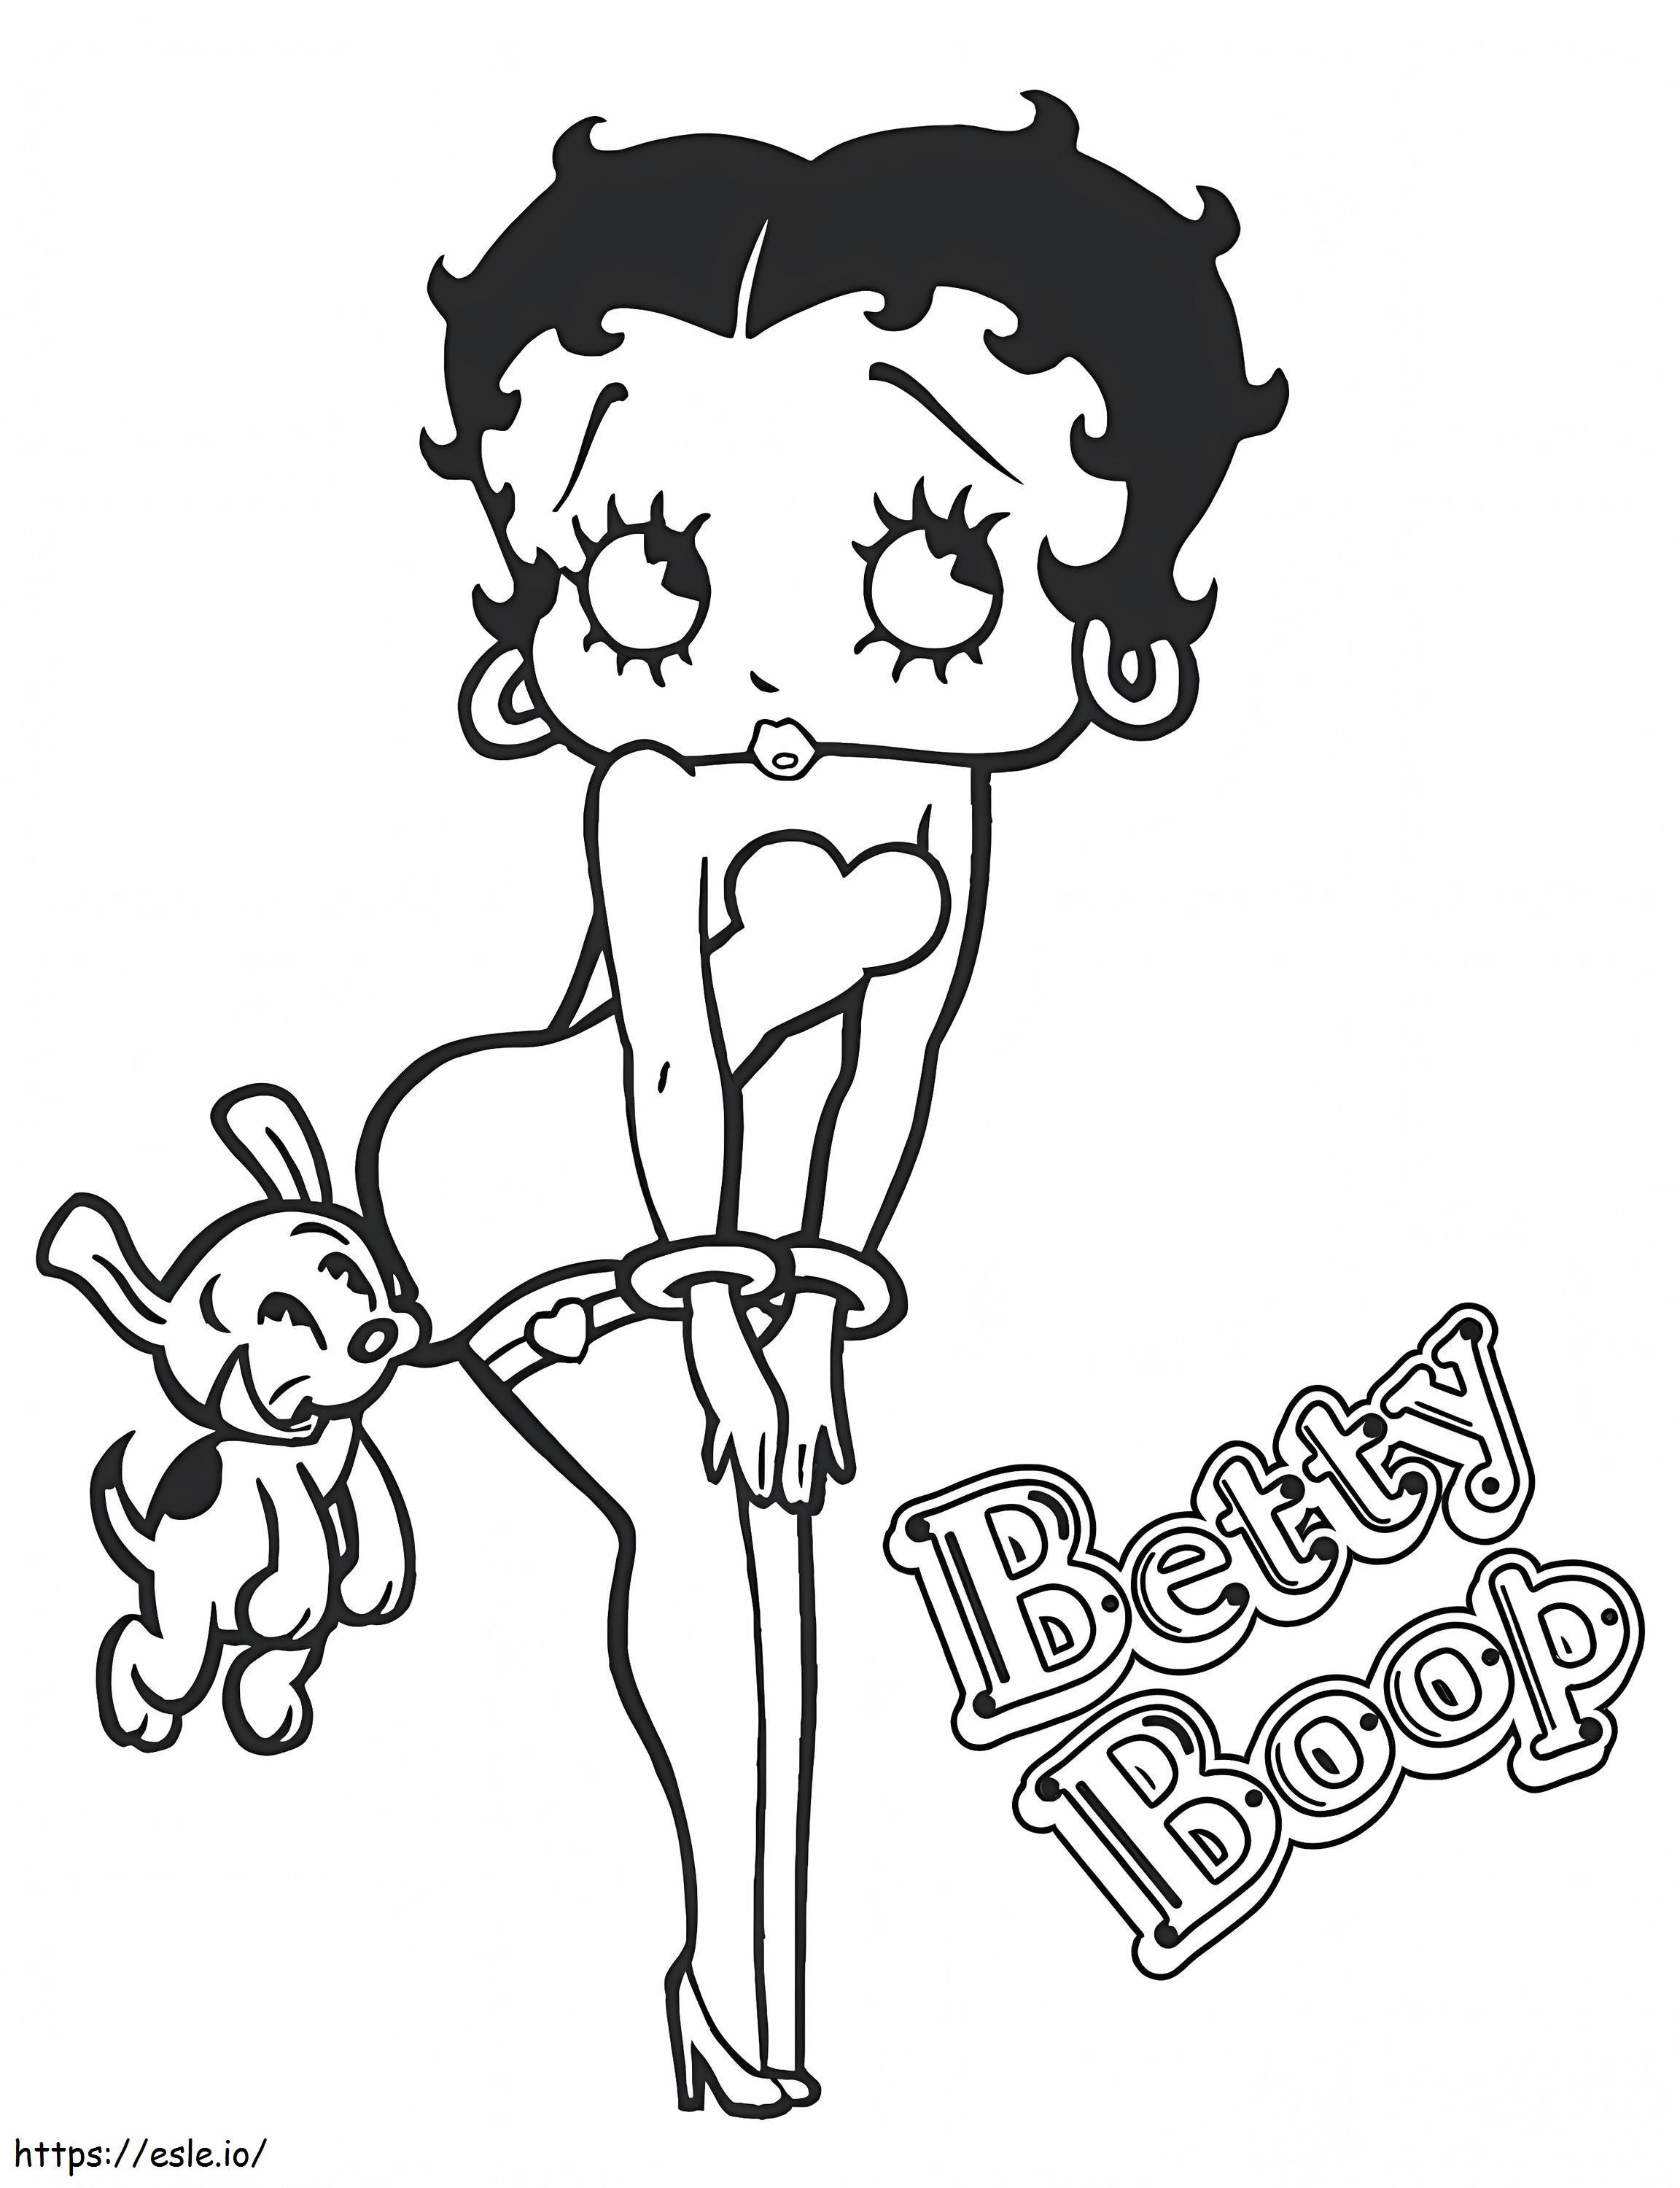 Betty Boop With Puppy coloring page